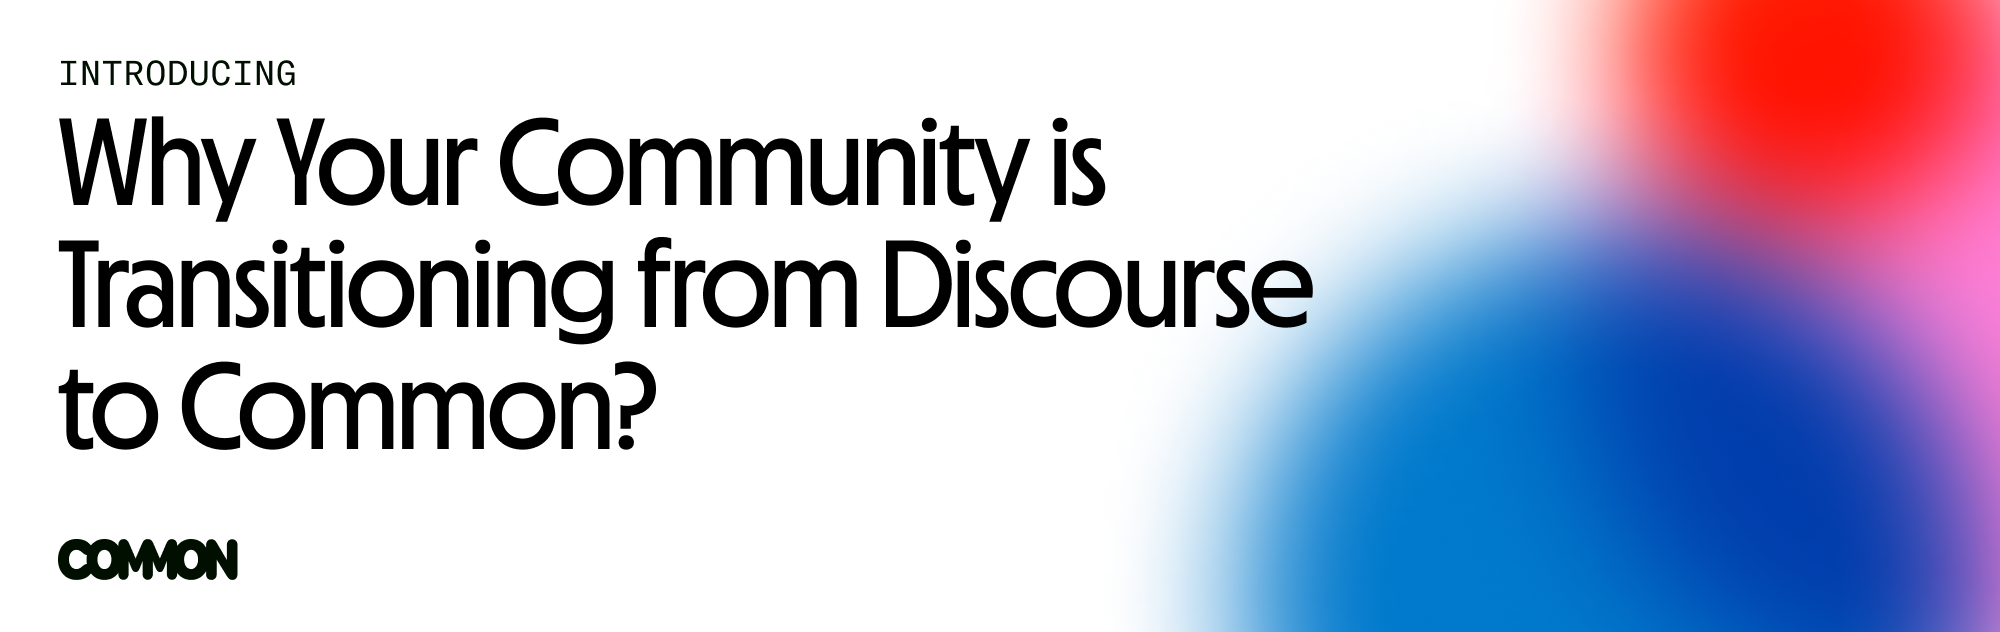 Why your community is transitioning from discourse to common?